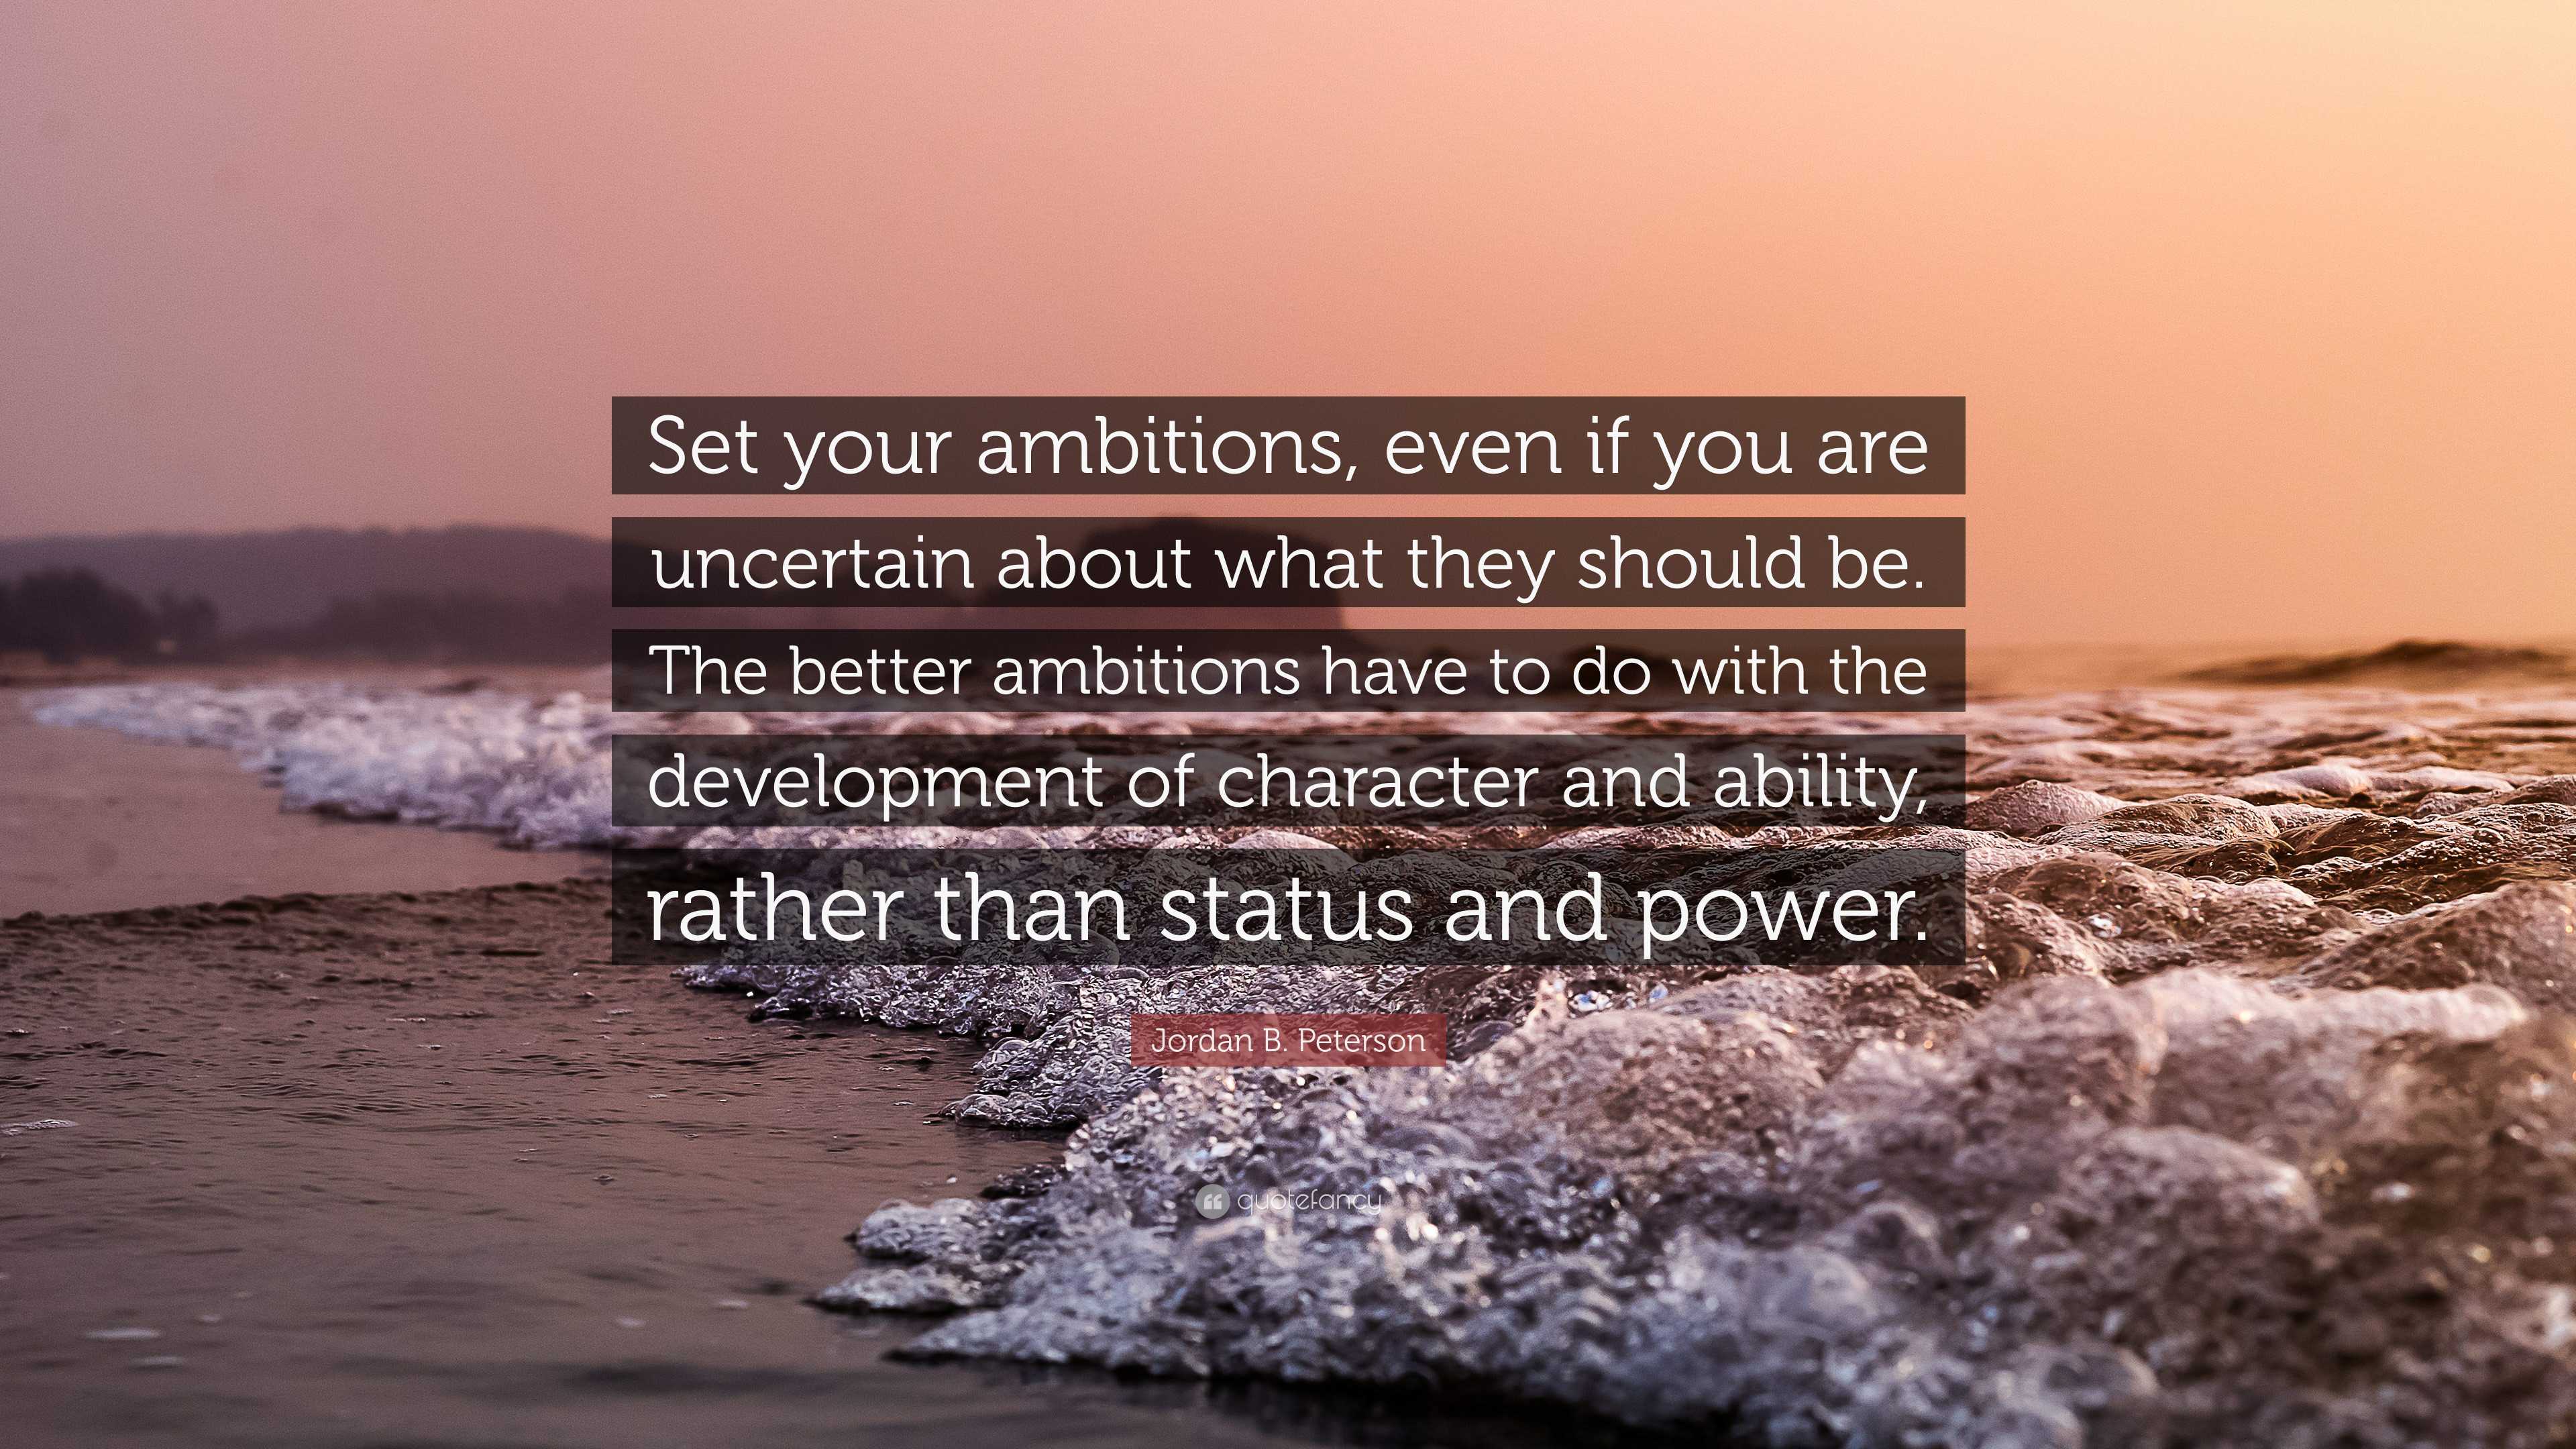 Jordan B. Peterson Quote: “Set your ambitions, even if you are